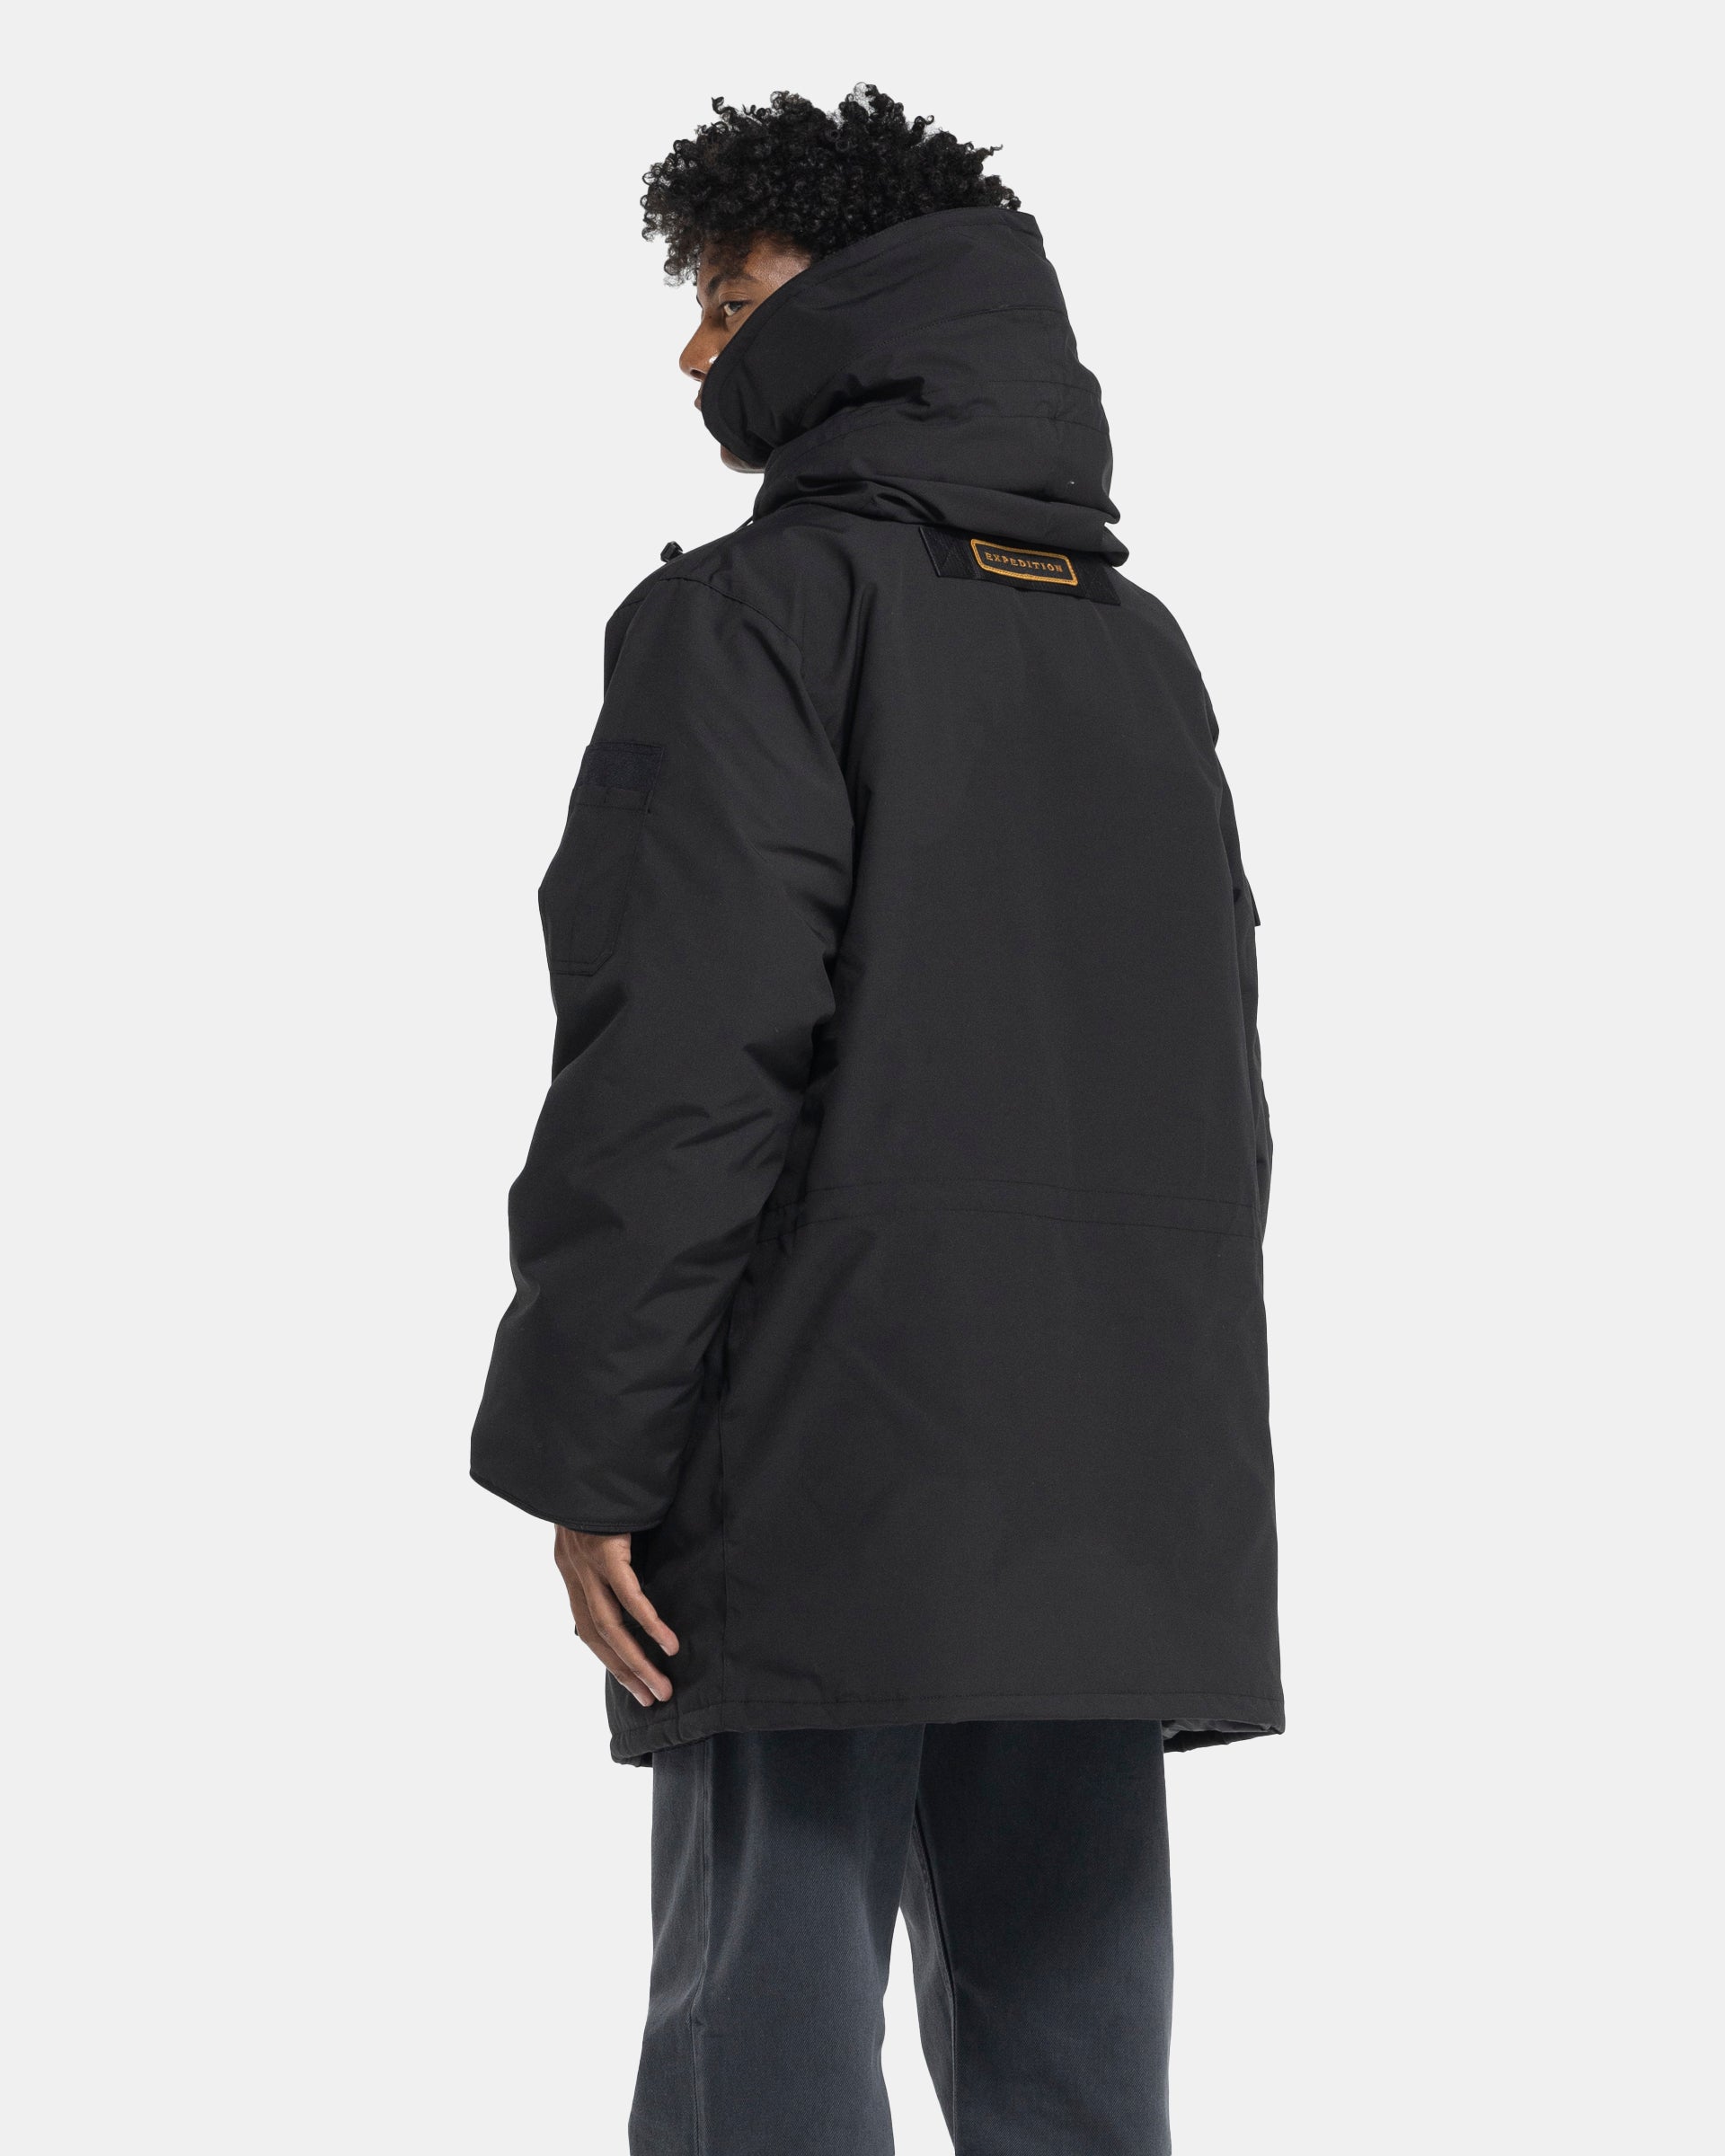 Expedition Parka in Black